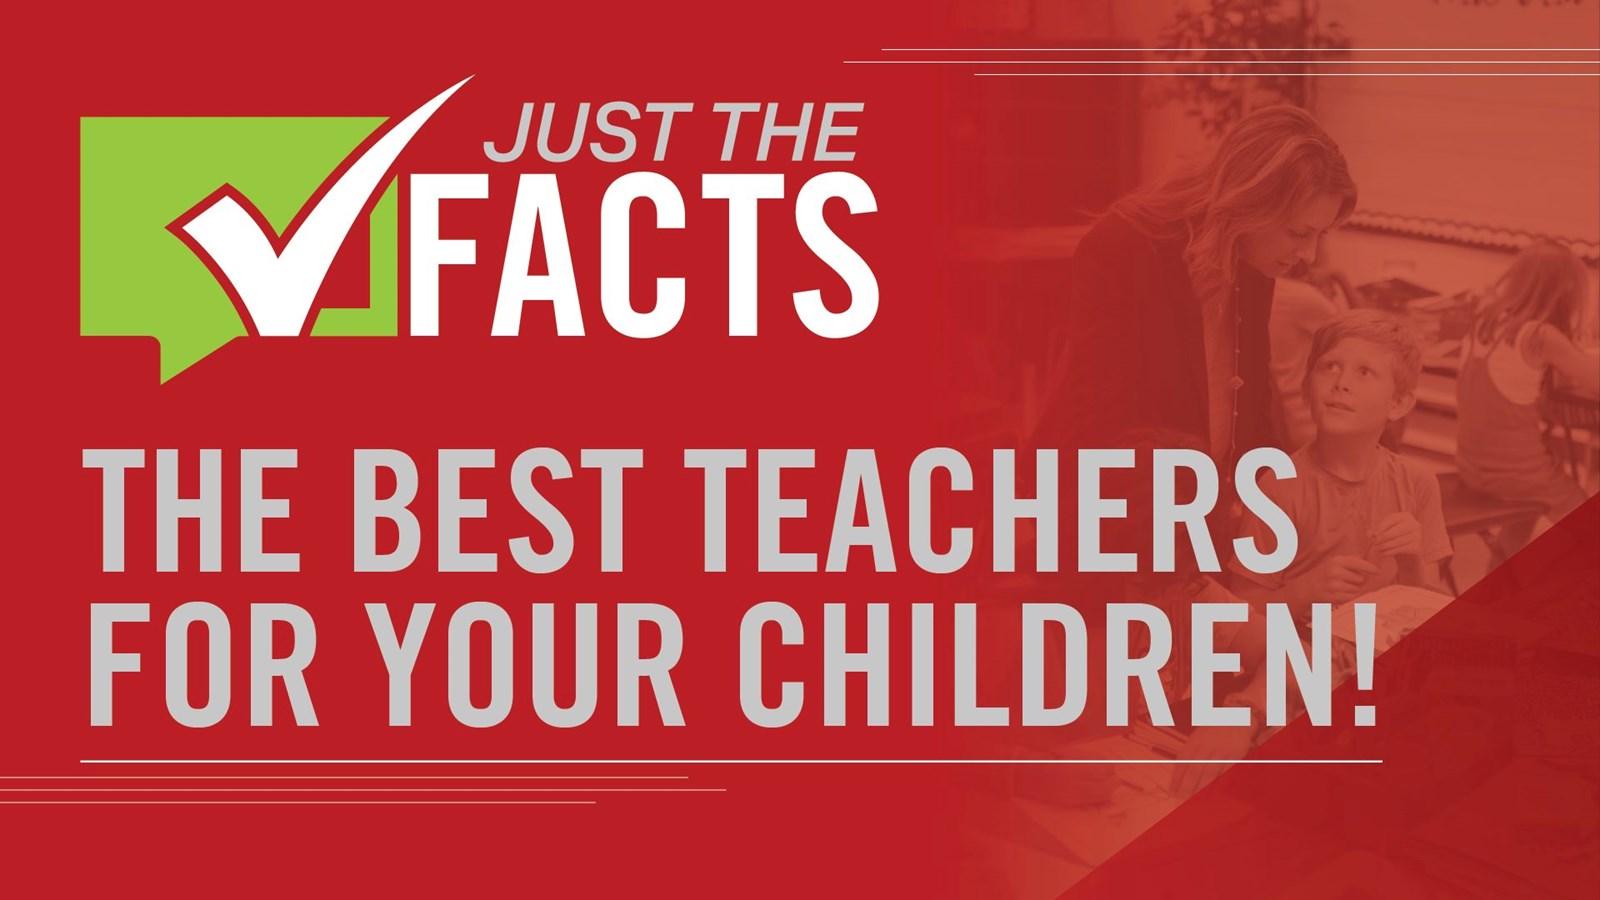 Just the Facts the Best Teachers